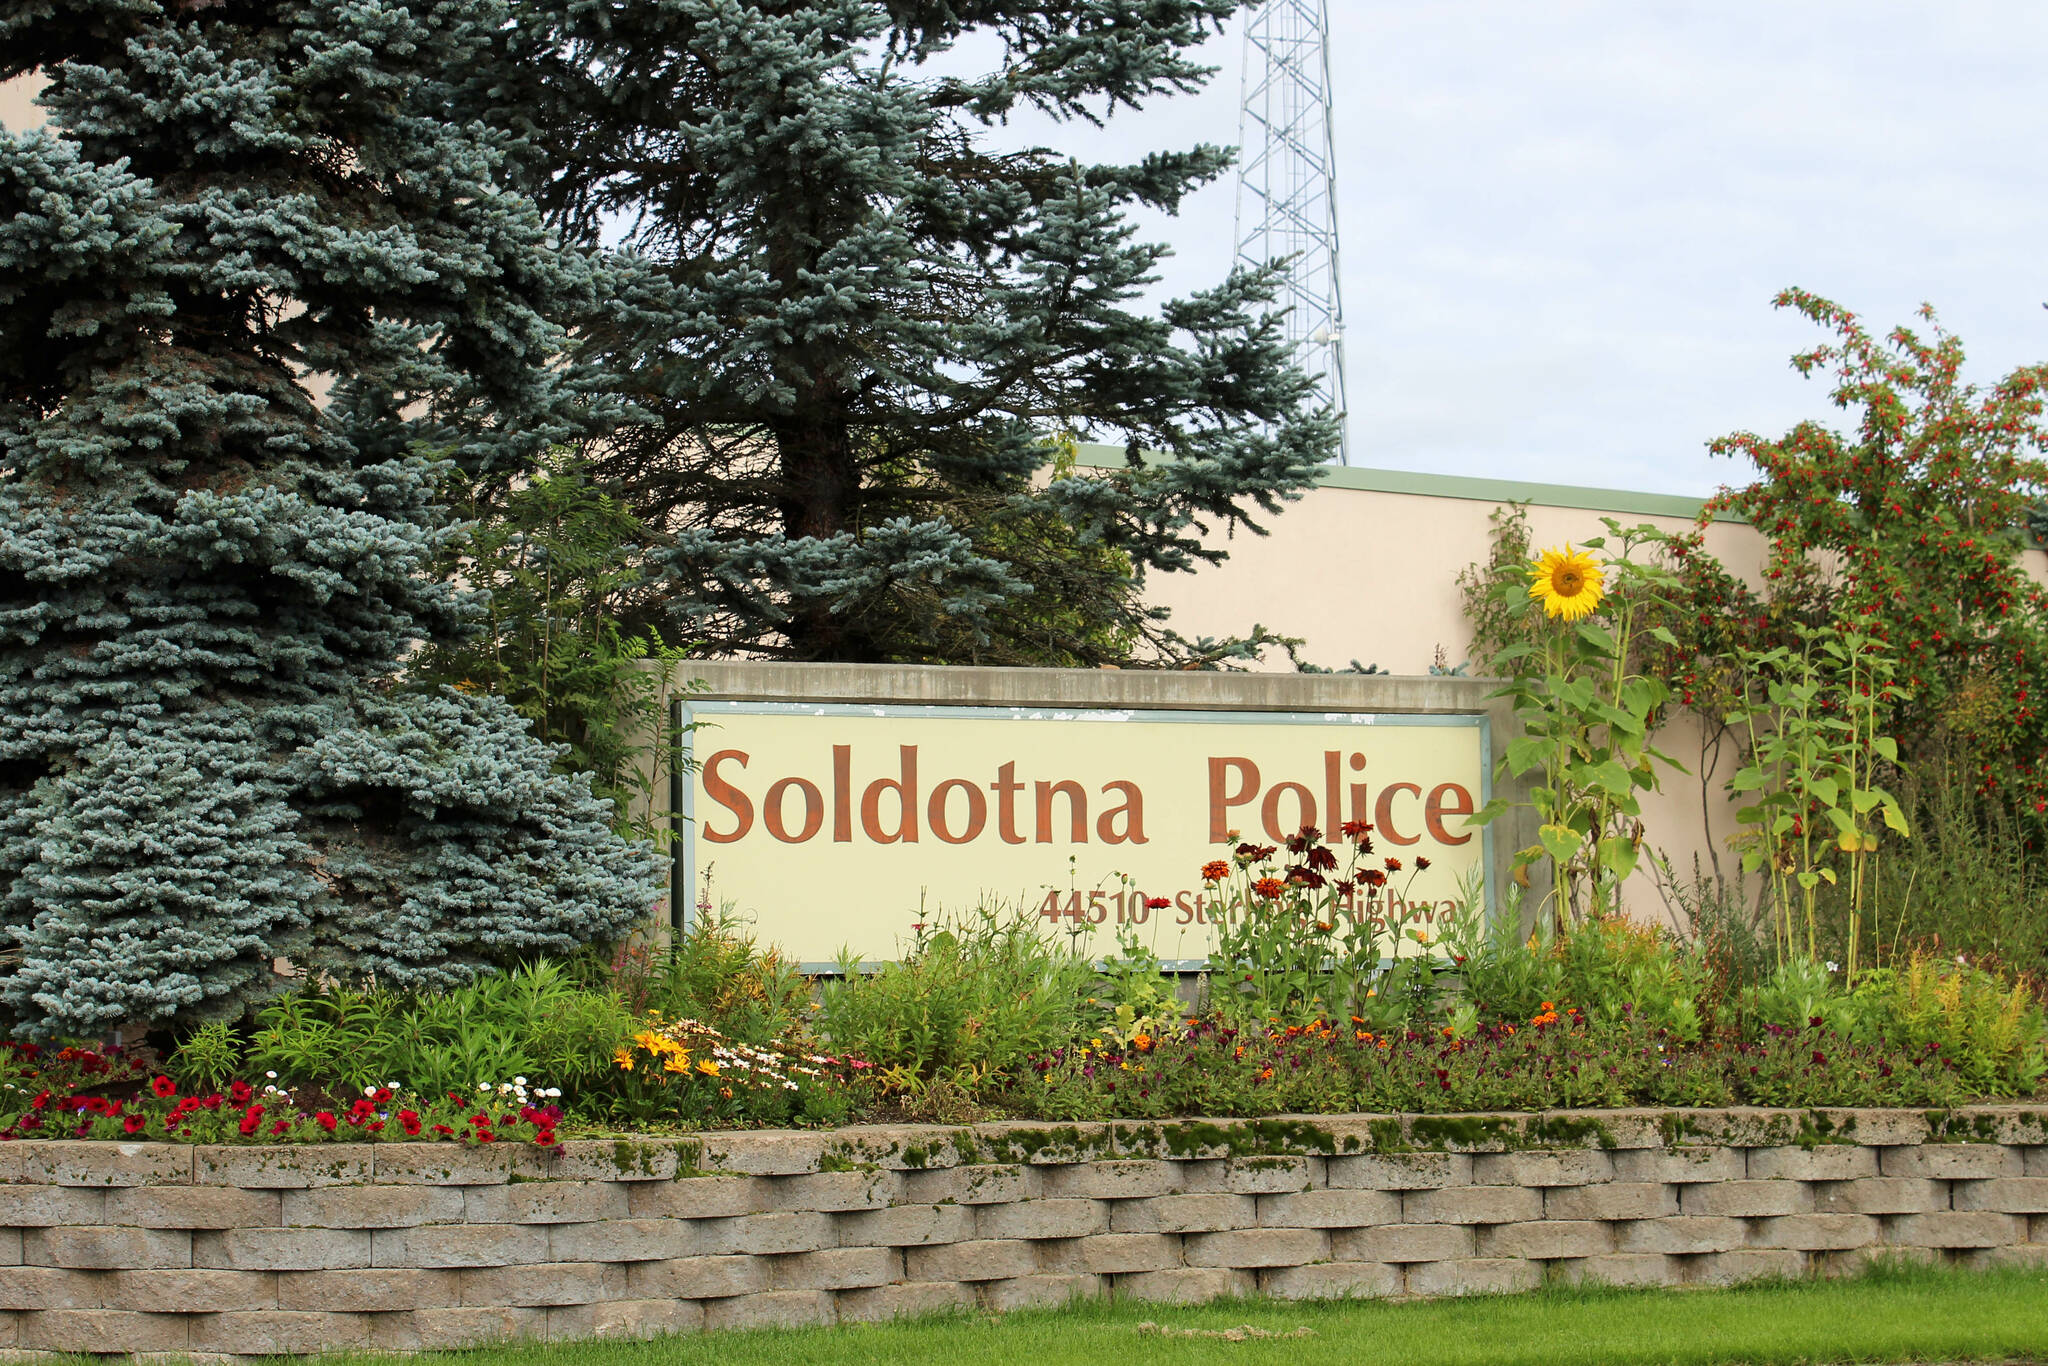 The Soldotna Police Department is photographed on Tuesday, Aug. 30, 2022, in Soldotna, Alaska. (Ashlyn O’Hara/Peninsula Clarion)